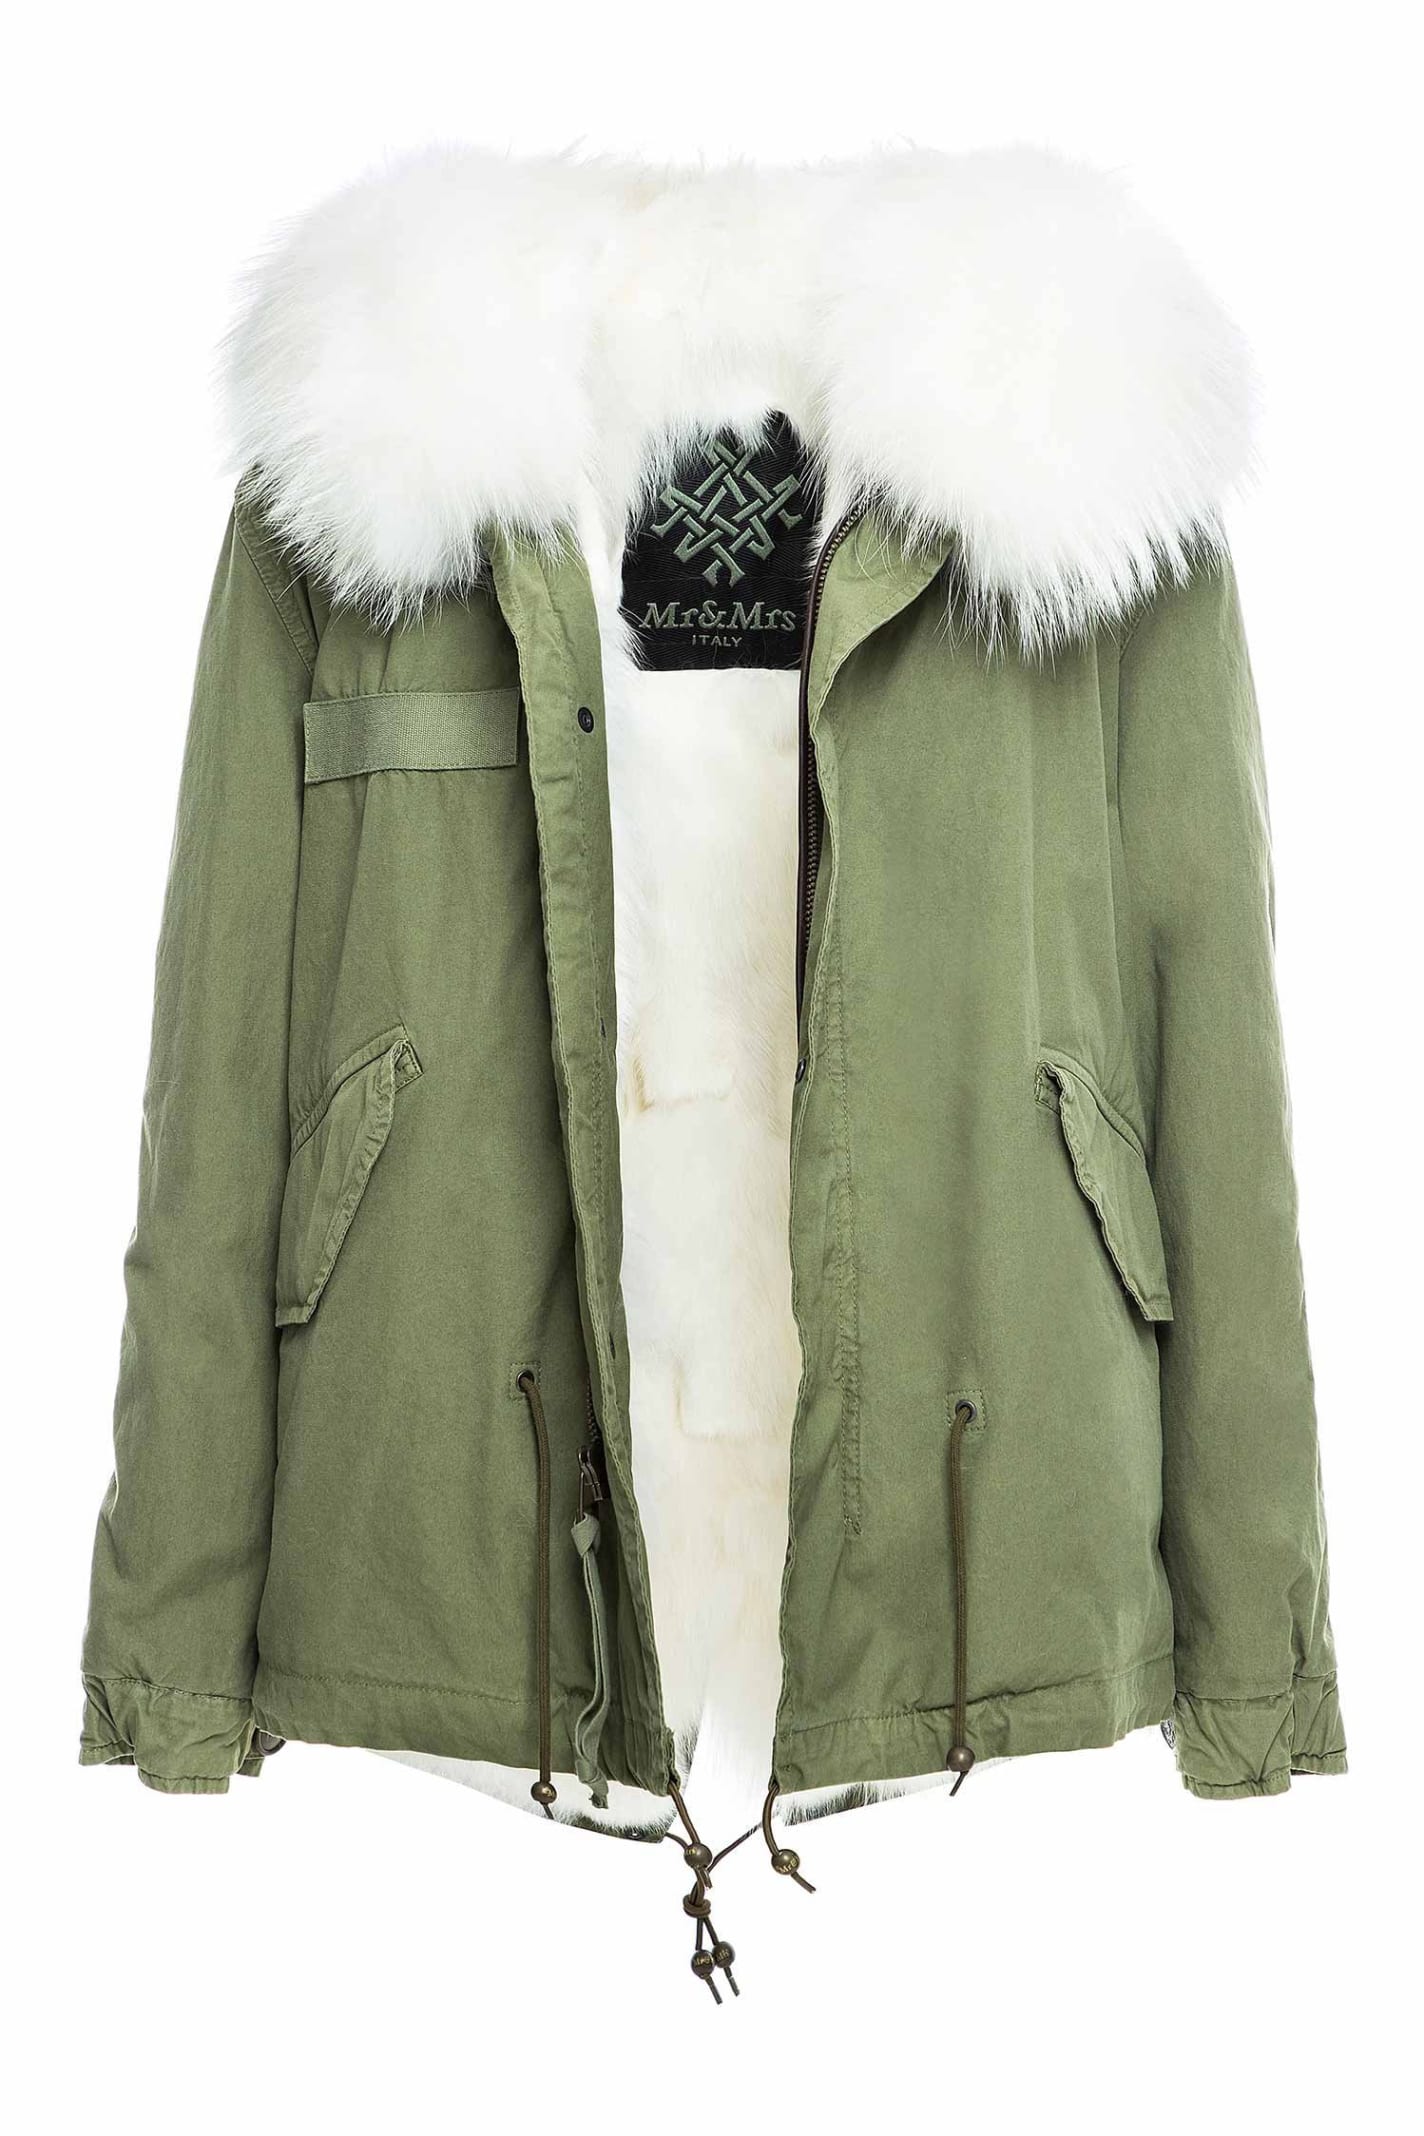 Mr & Mrs Italy Army Cotton Canvas Mini Parka With Fox Fur Lining